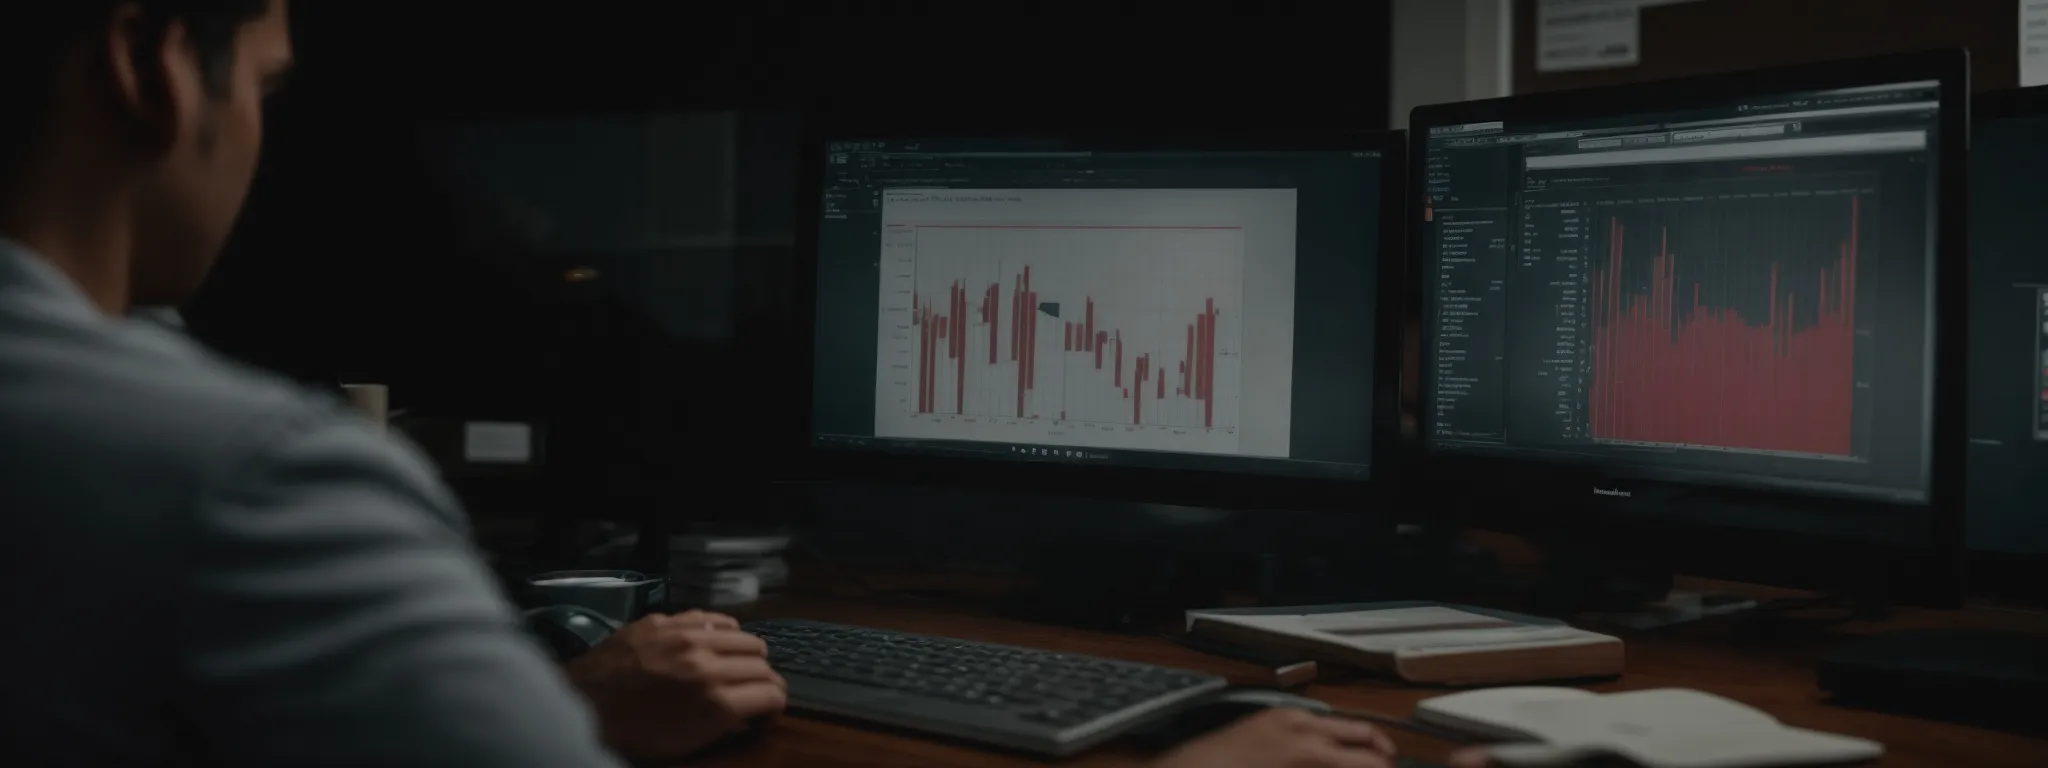 a marketer analyzing graphs and charts on a computer screen to optimize website content titles.